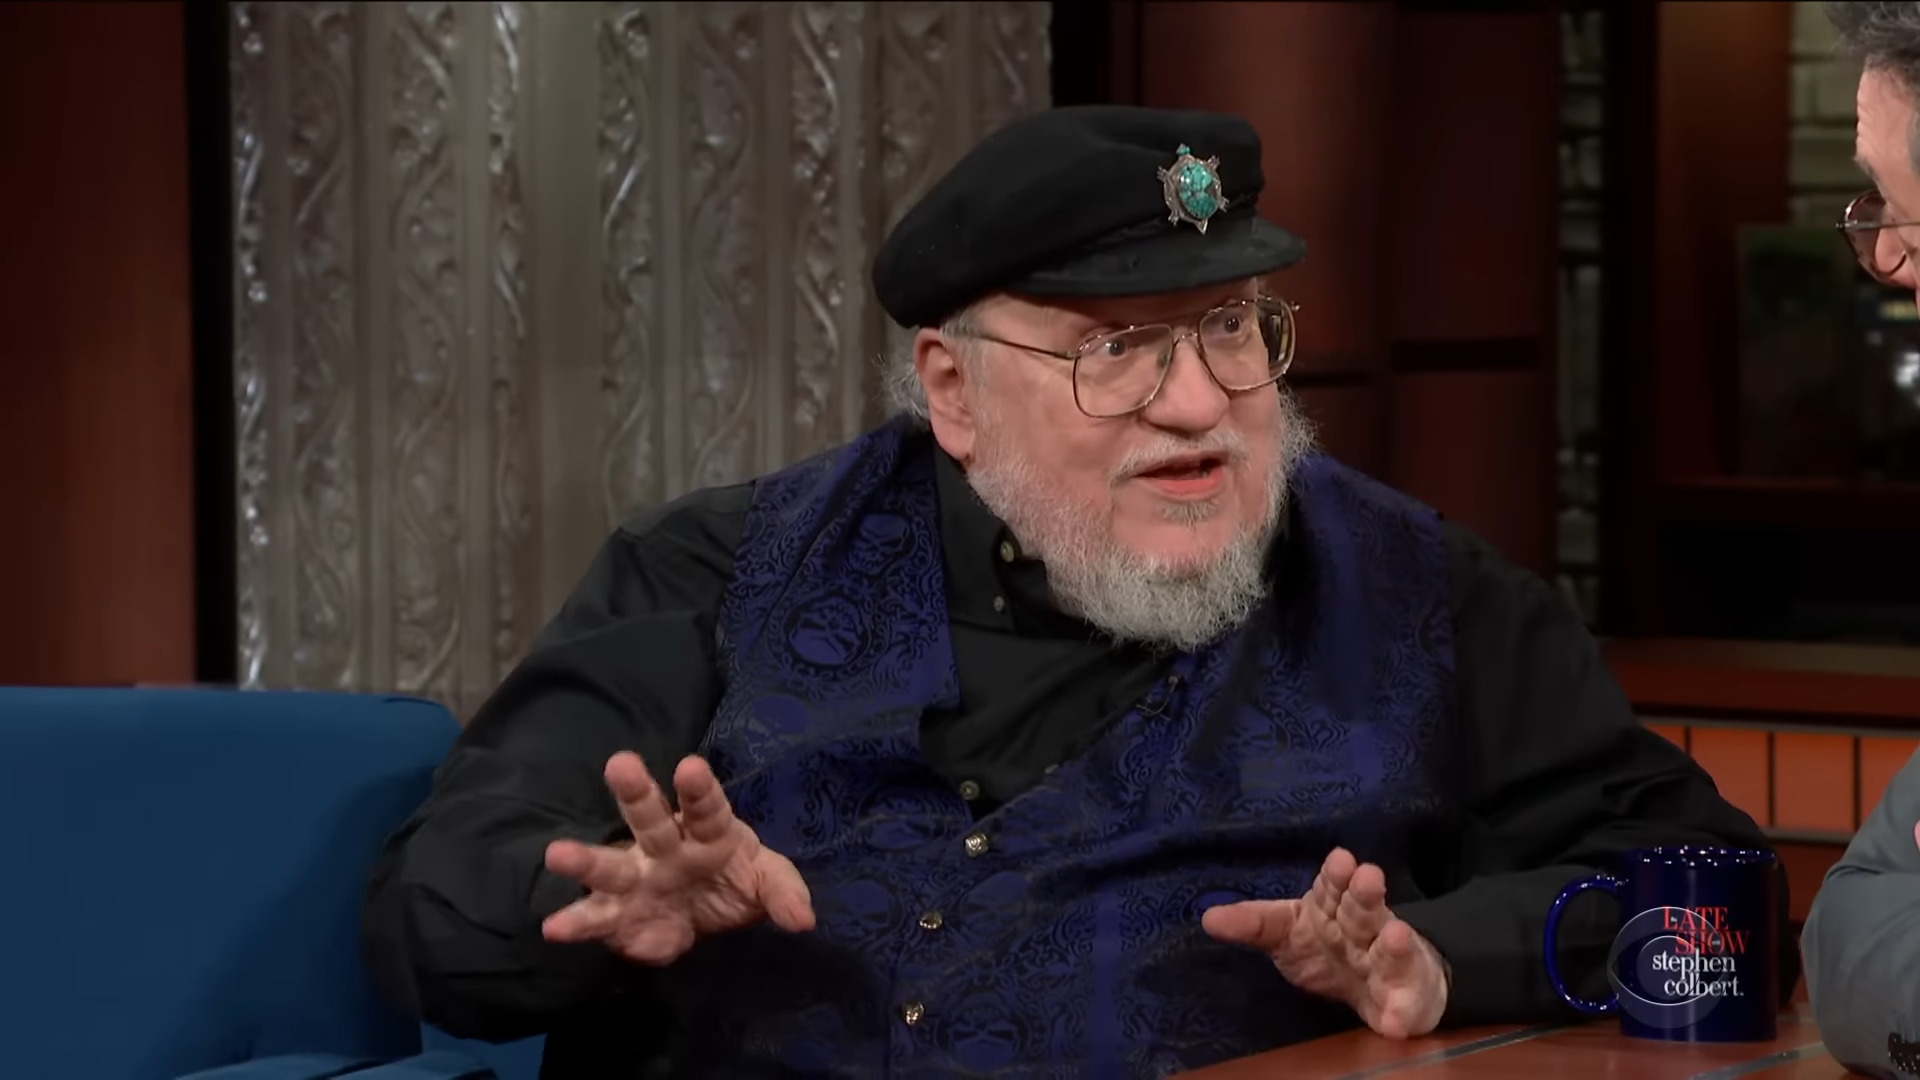  George RR Martin can't play Elden Ring because 'people seem to want this Winds of Winter book' 